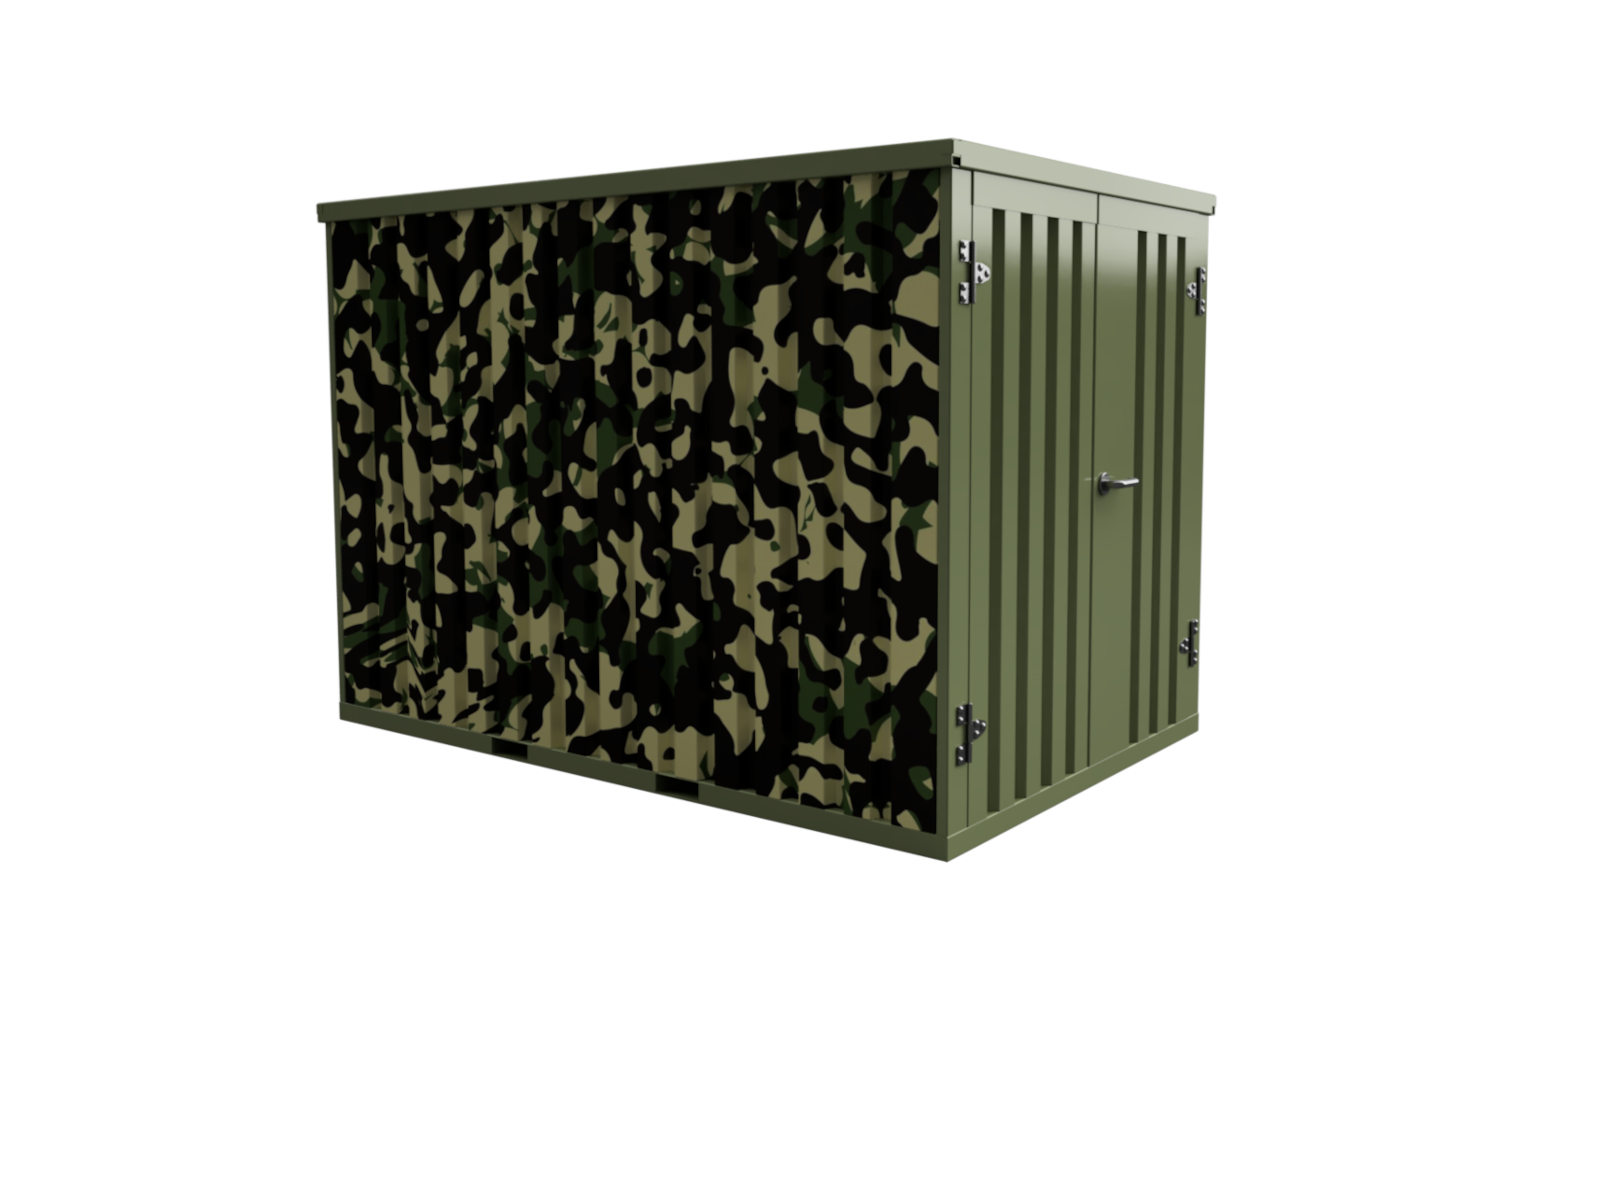 Military Army container 3x2 meter (forest camouflage) mot vit bakgrund